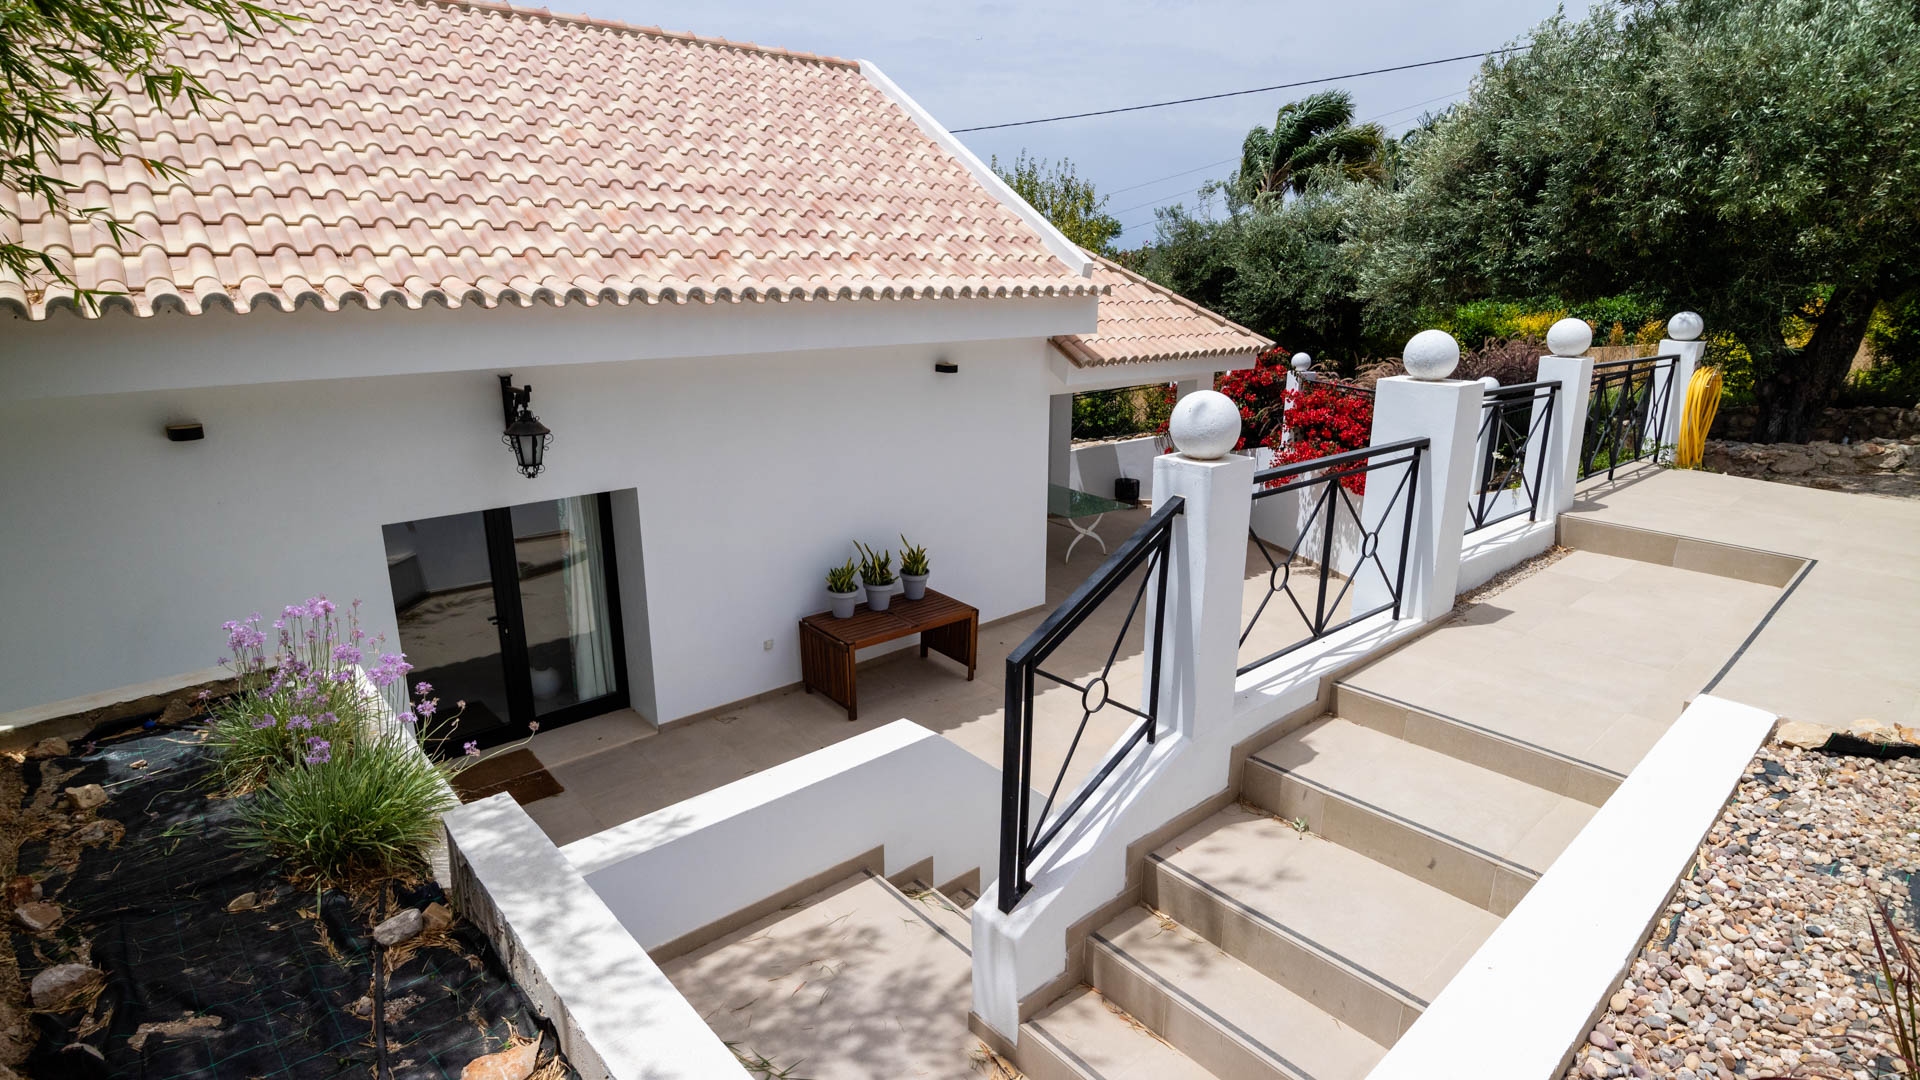 Newly renovated 3 Bedroom Villa with Sea Views, Parragil, Loulé | VM1874 This newly renovated 3 bedroom villa in the hills between Loulé and Boliqueime offers spectacular panoramic sea and country views from its terrace.